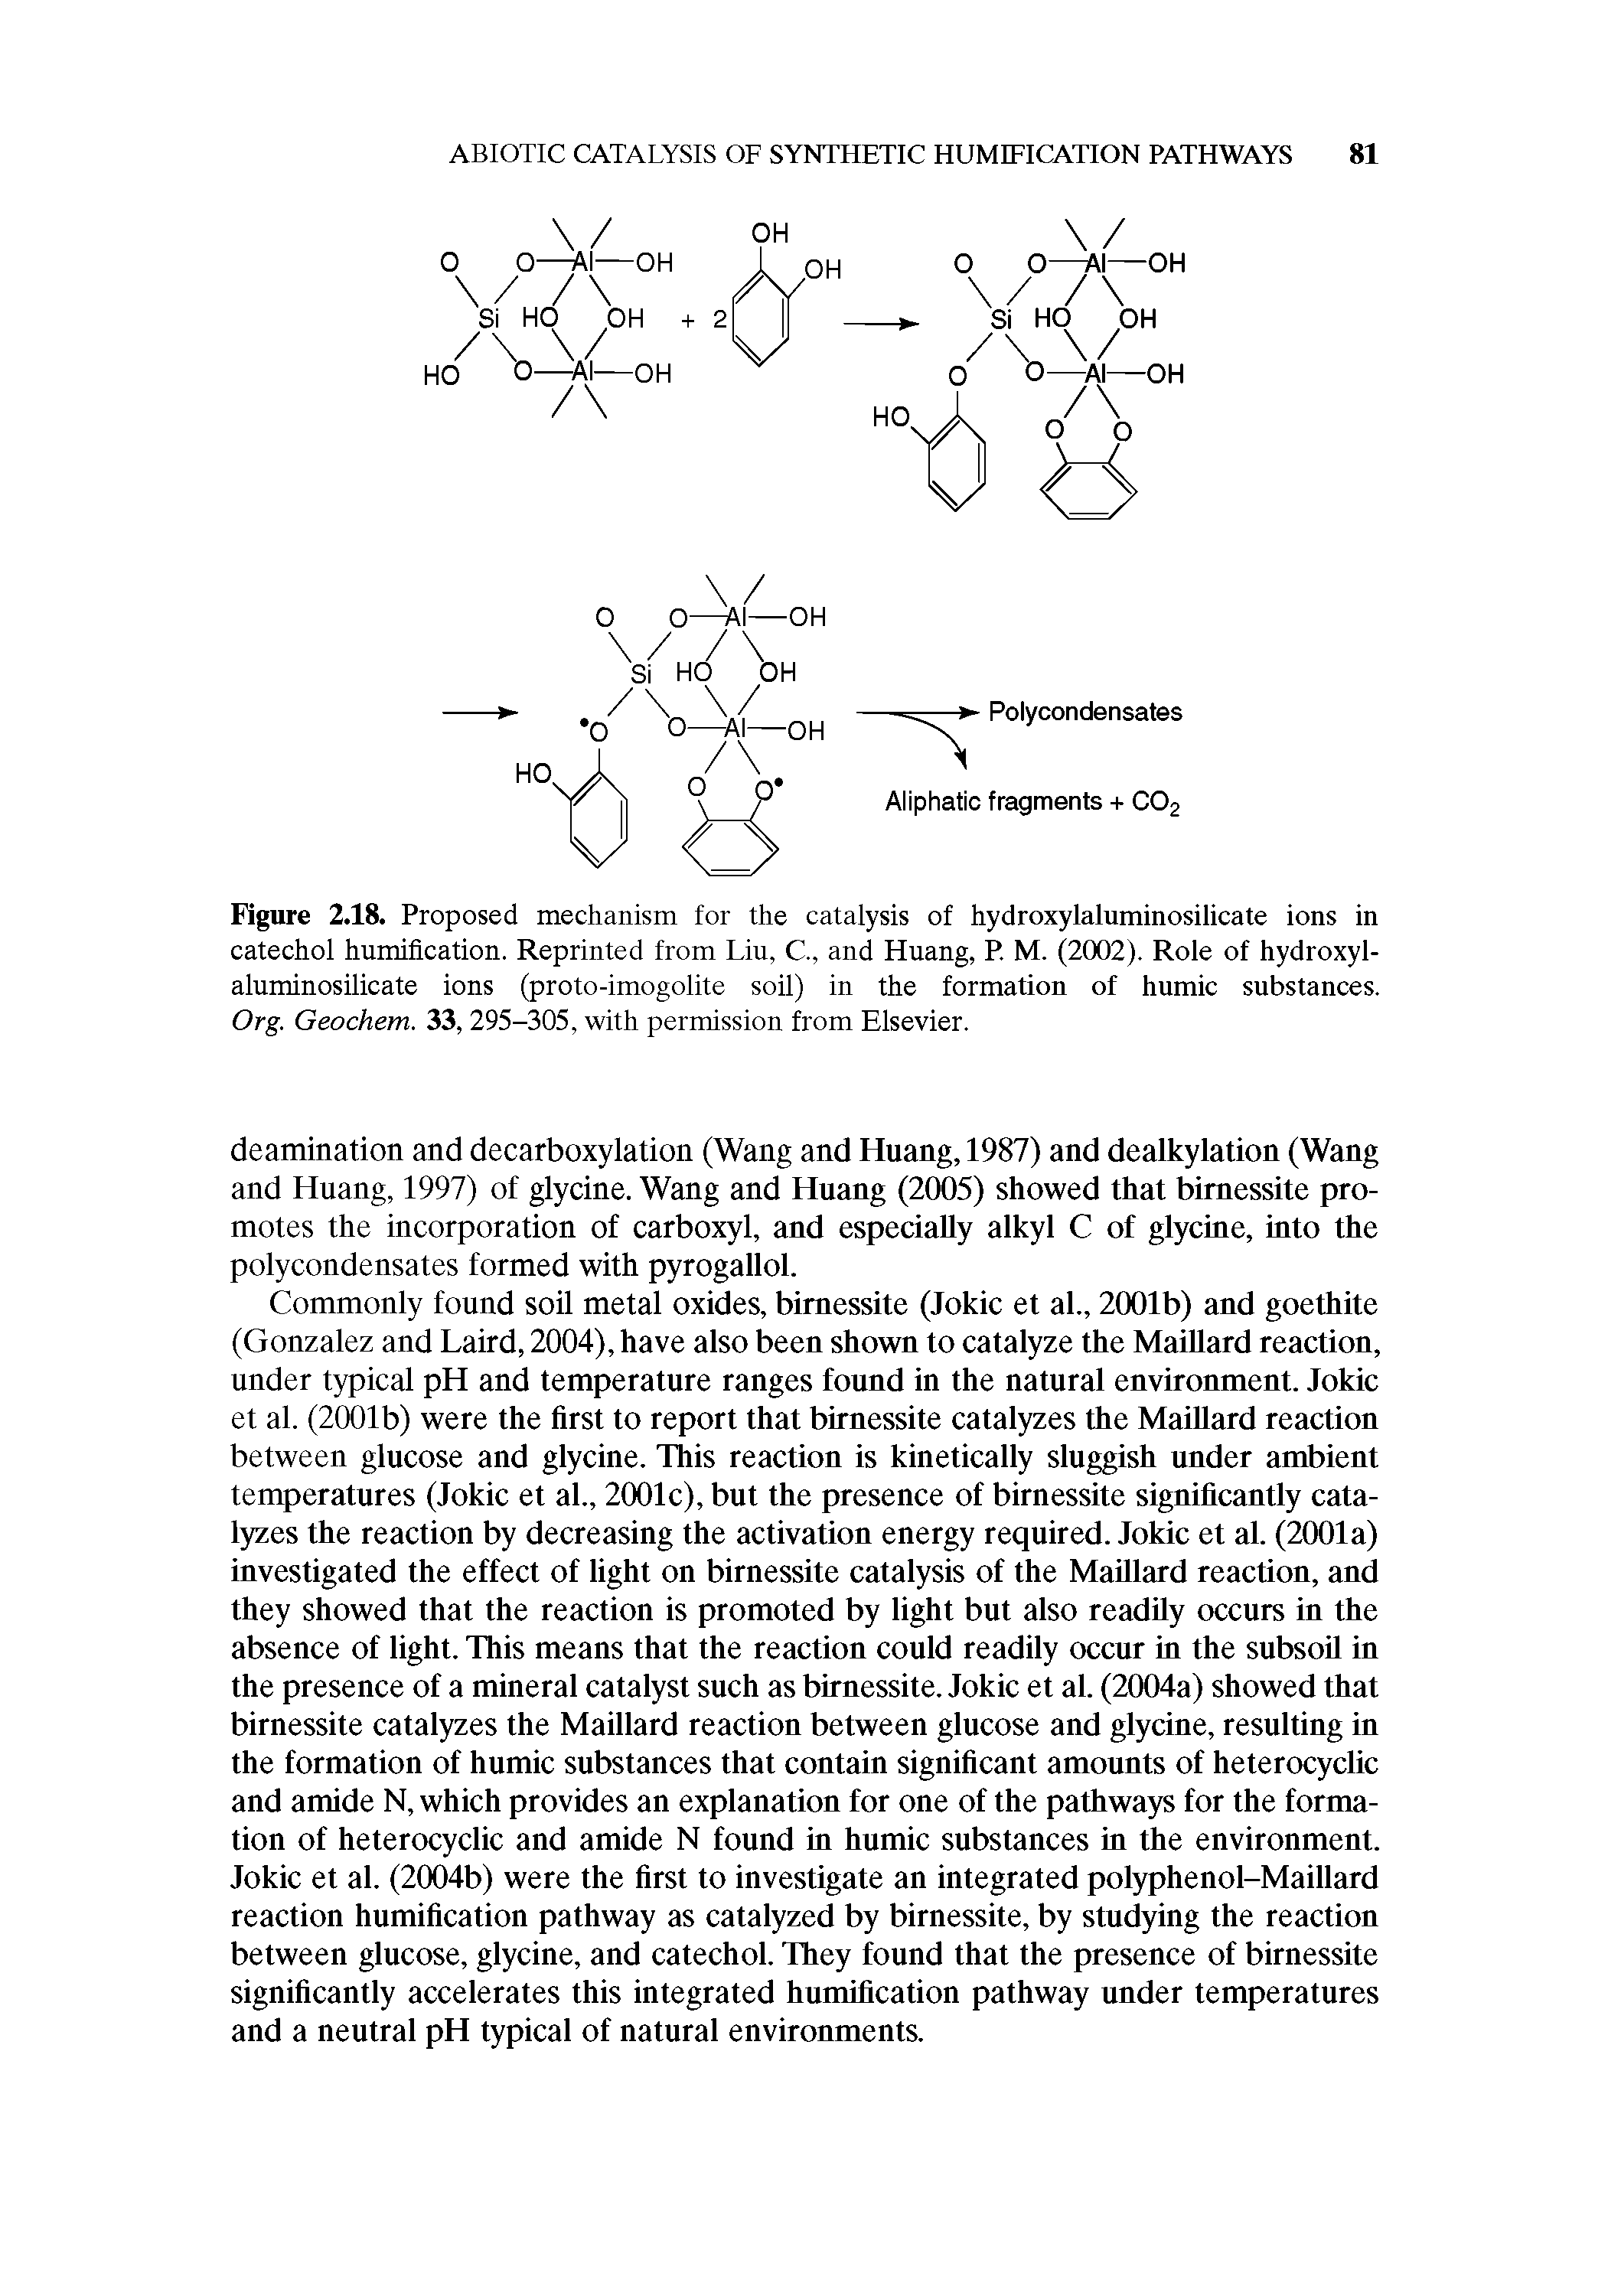 Figure 2.18. Proposed mechanism for the catalysis of hydroxylaluminosilicate ions in catechol humification. Reprinted from Liu, C., and Huang, P. M. (2002). Role of hydroxylaluminosilicate ions (proto-imogolite soil) in the formation of humic substances. Org. Geochem. 33, 295-305, with permission from Elsevier.